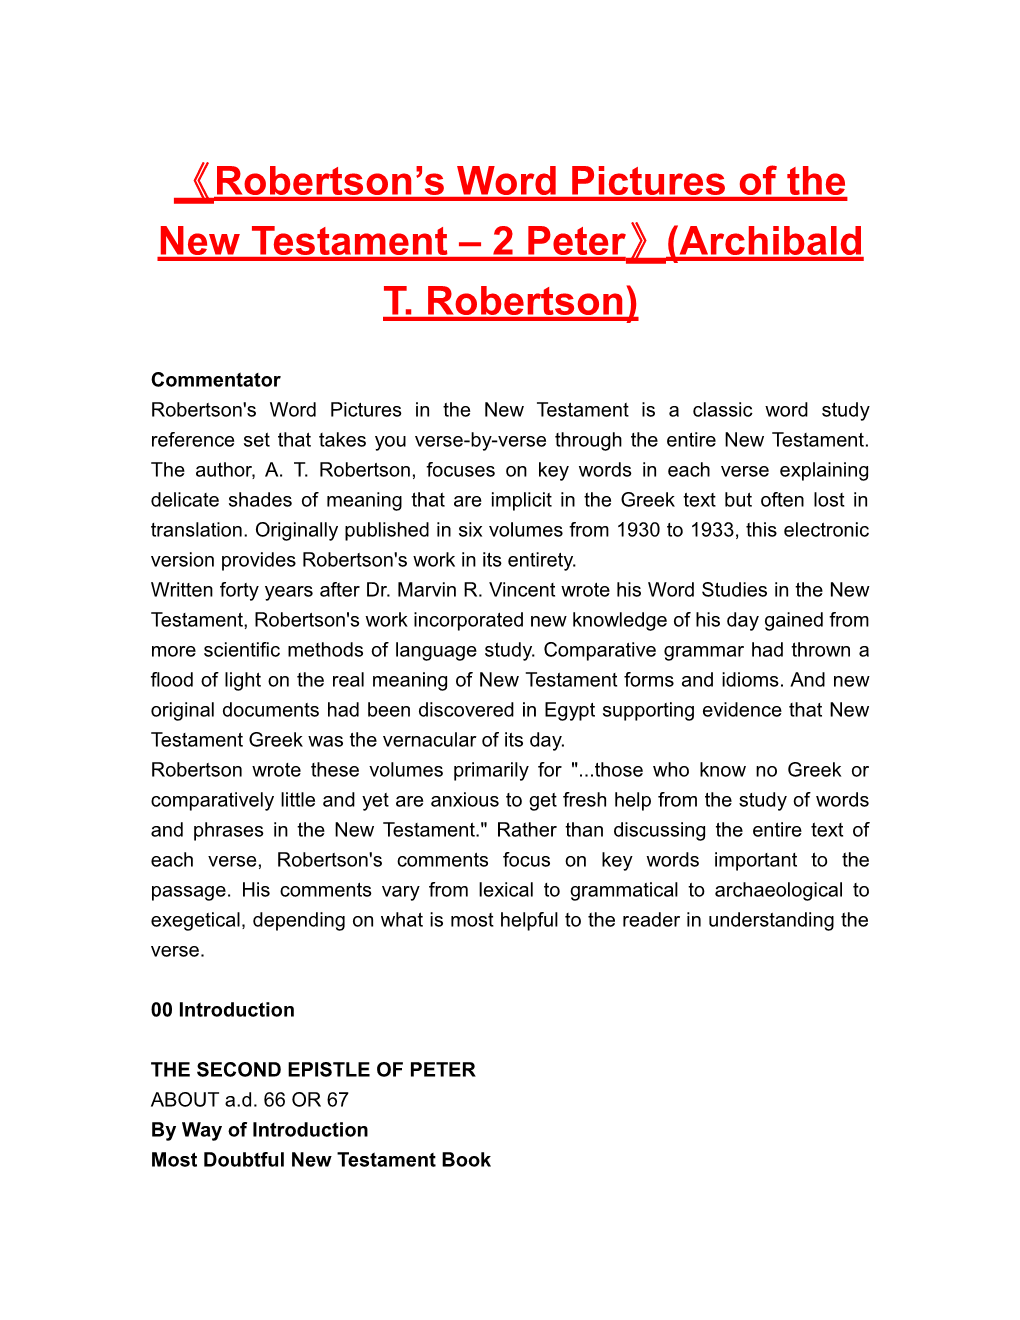 Robertson Sword Pictures of the New Testament 2 Peter (Archibald T. Robertson)